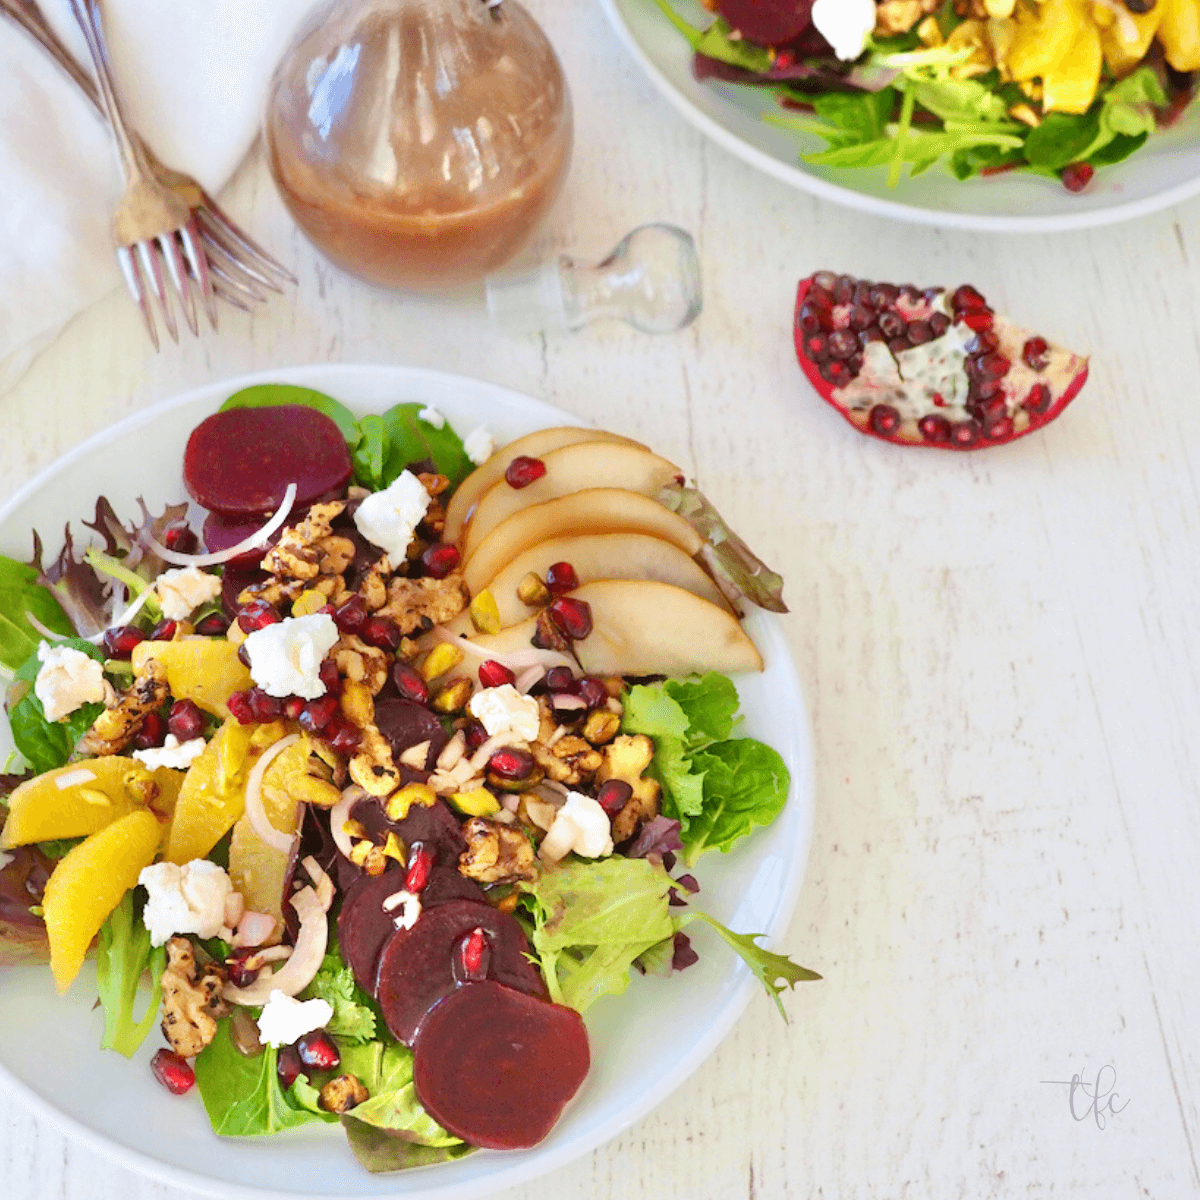 Plated salad loaded with beets and fruit with pomegranate dressing.